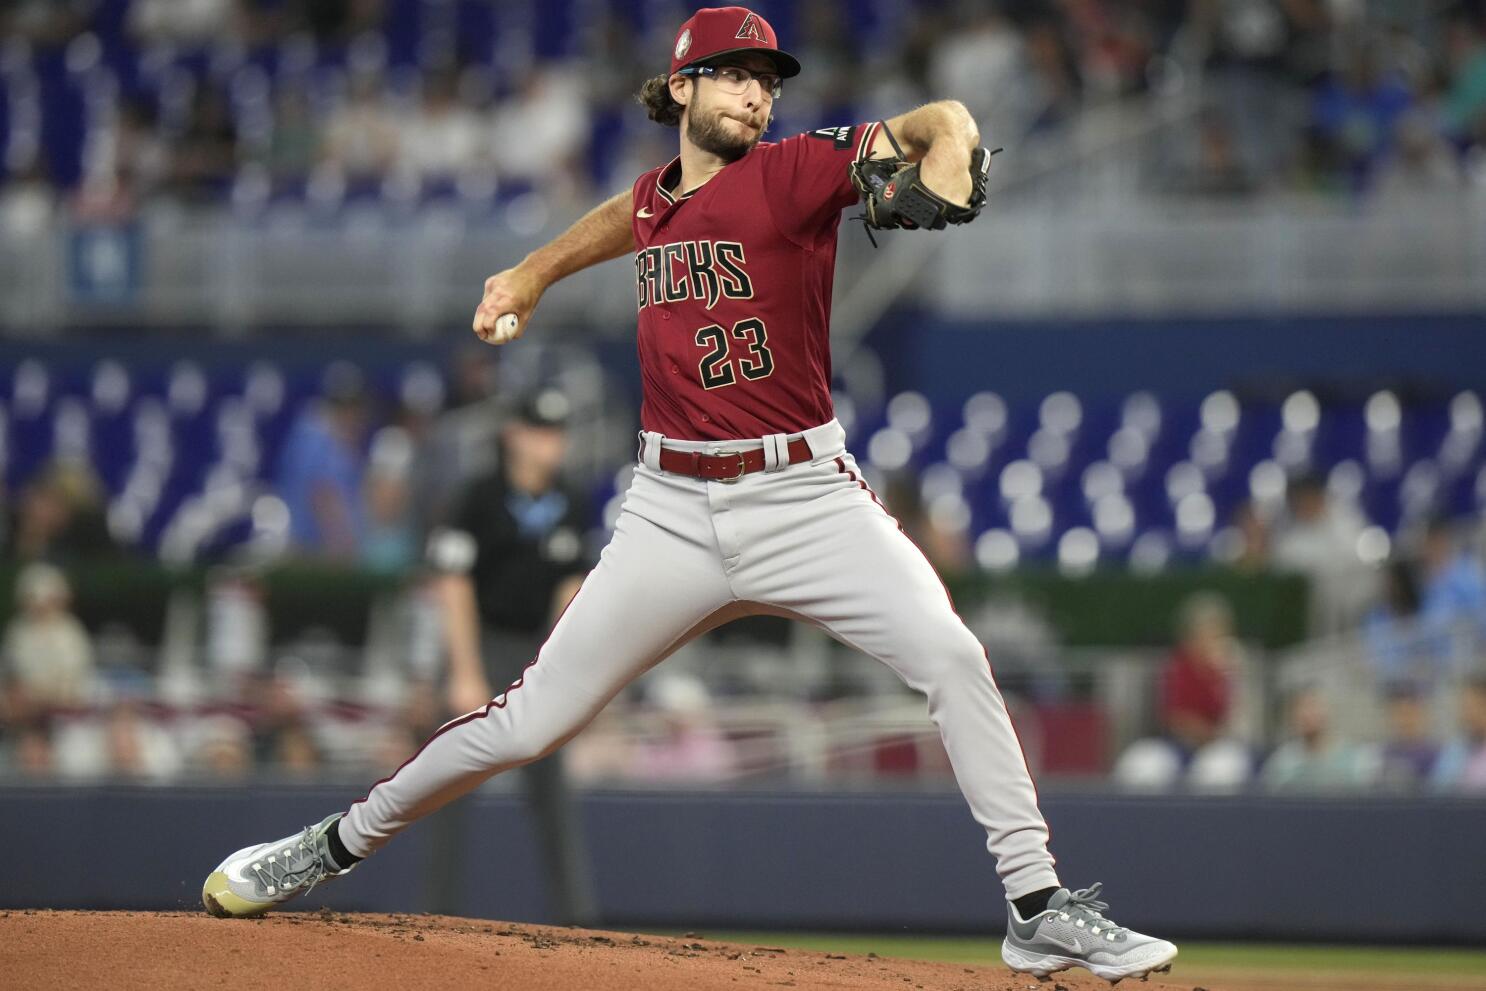 D-backs Zac Gallen arrives, will pitch in series vs. Phillies